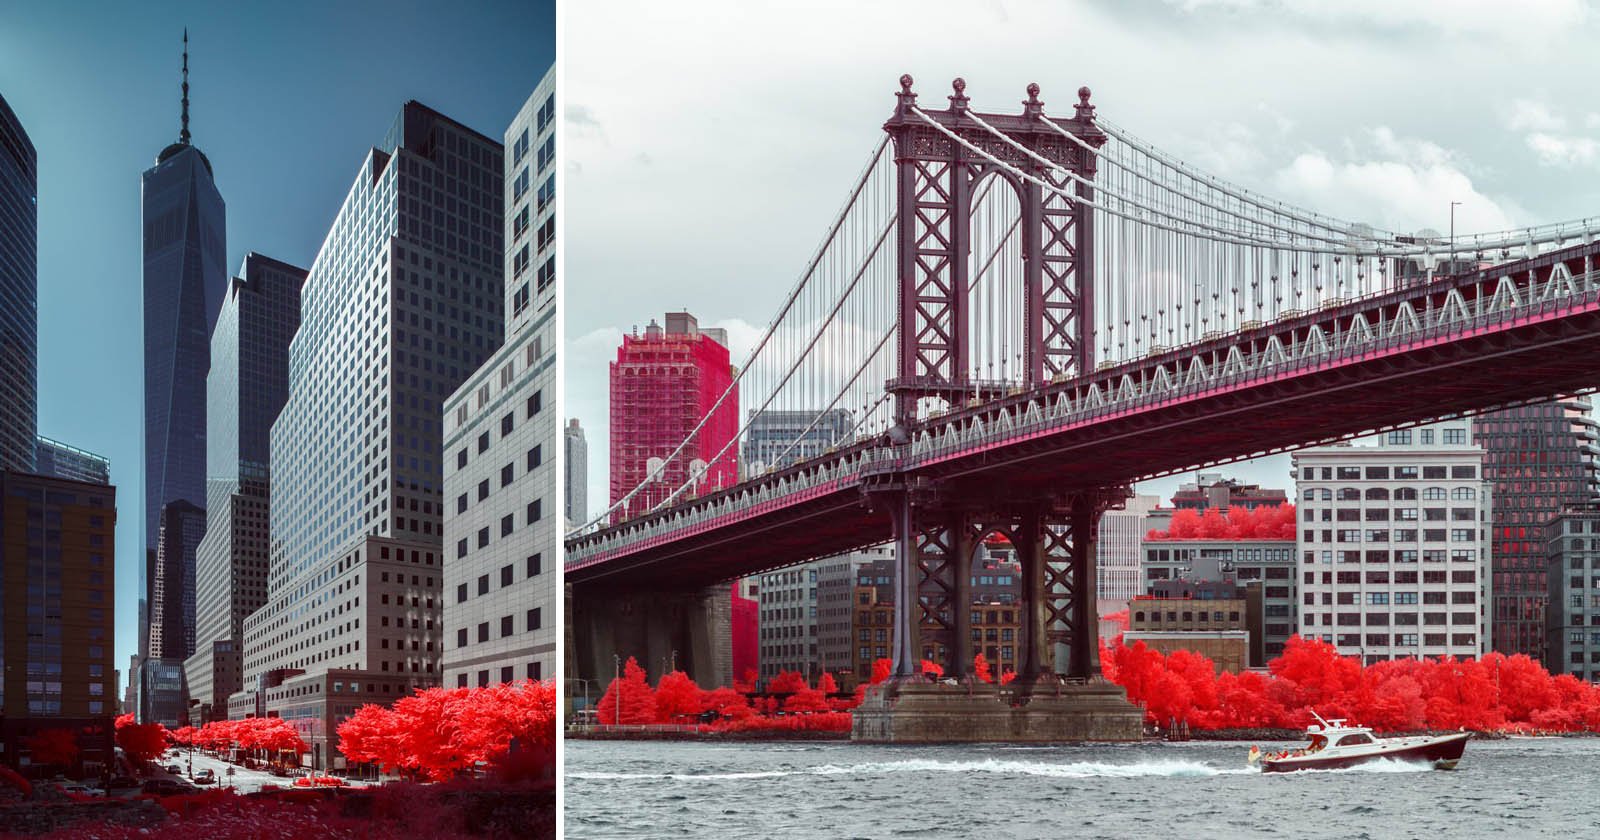 Infrared Photos of New York City Show the Big Apple in a Different Light